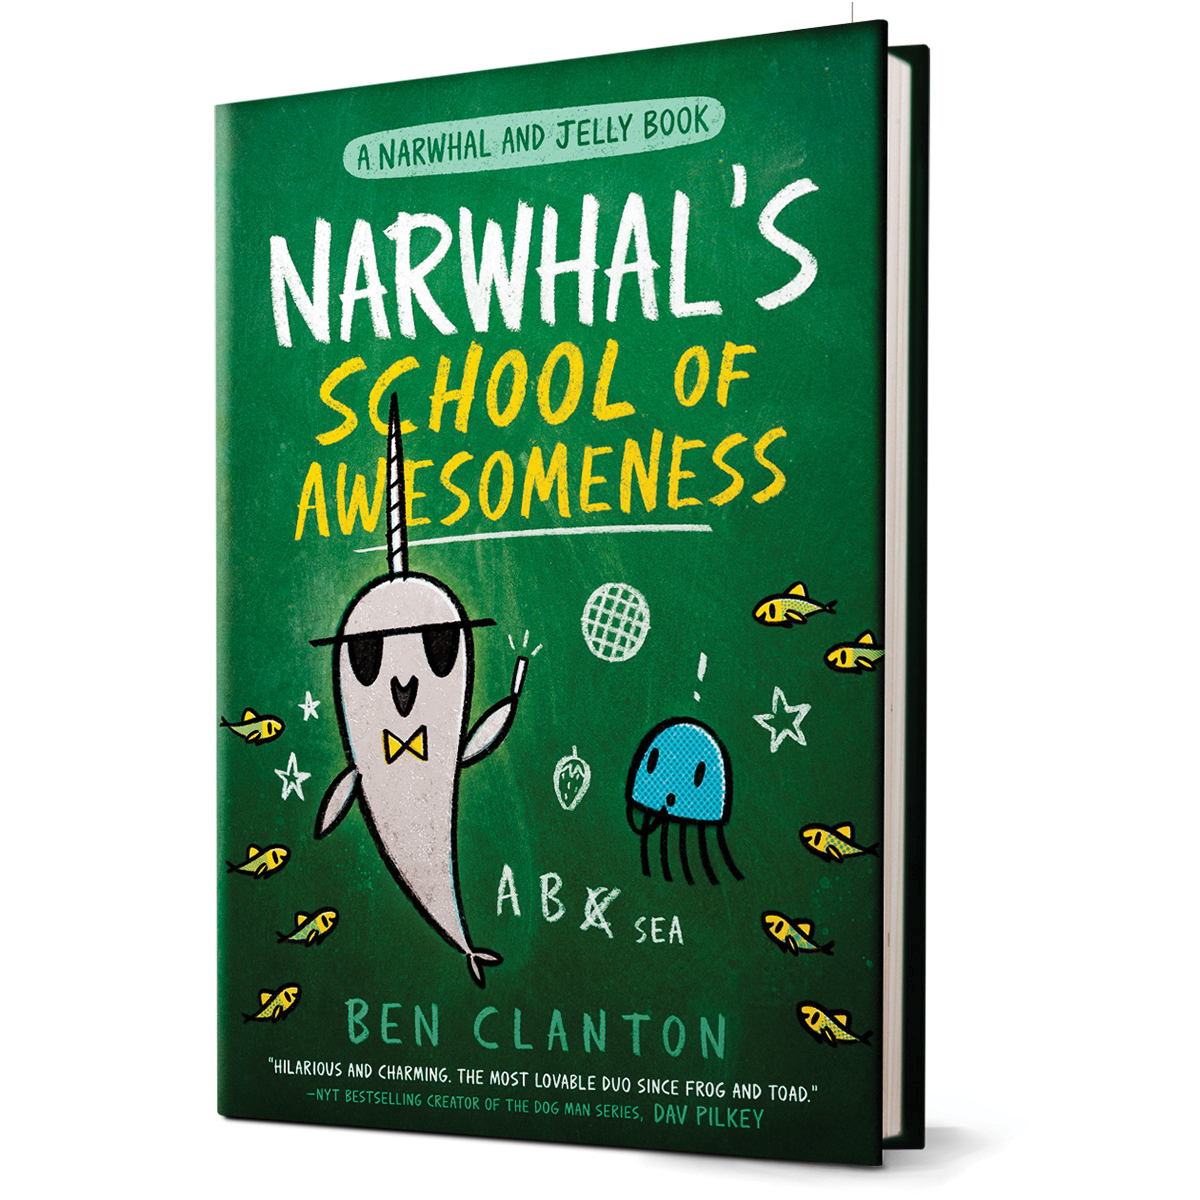  Narwhal's School of Awesomeness: A Narwhal and Jelly Book